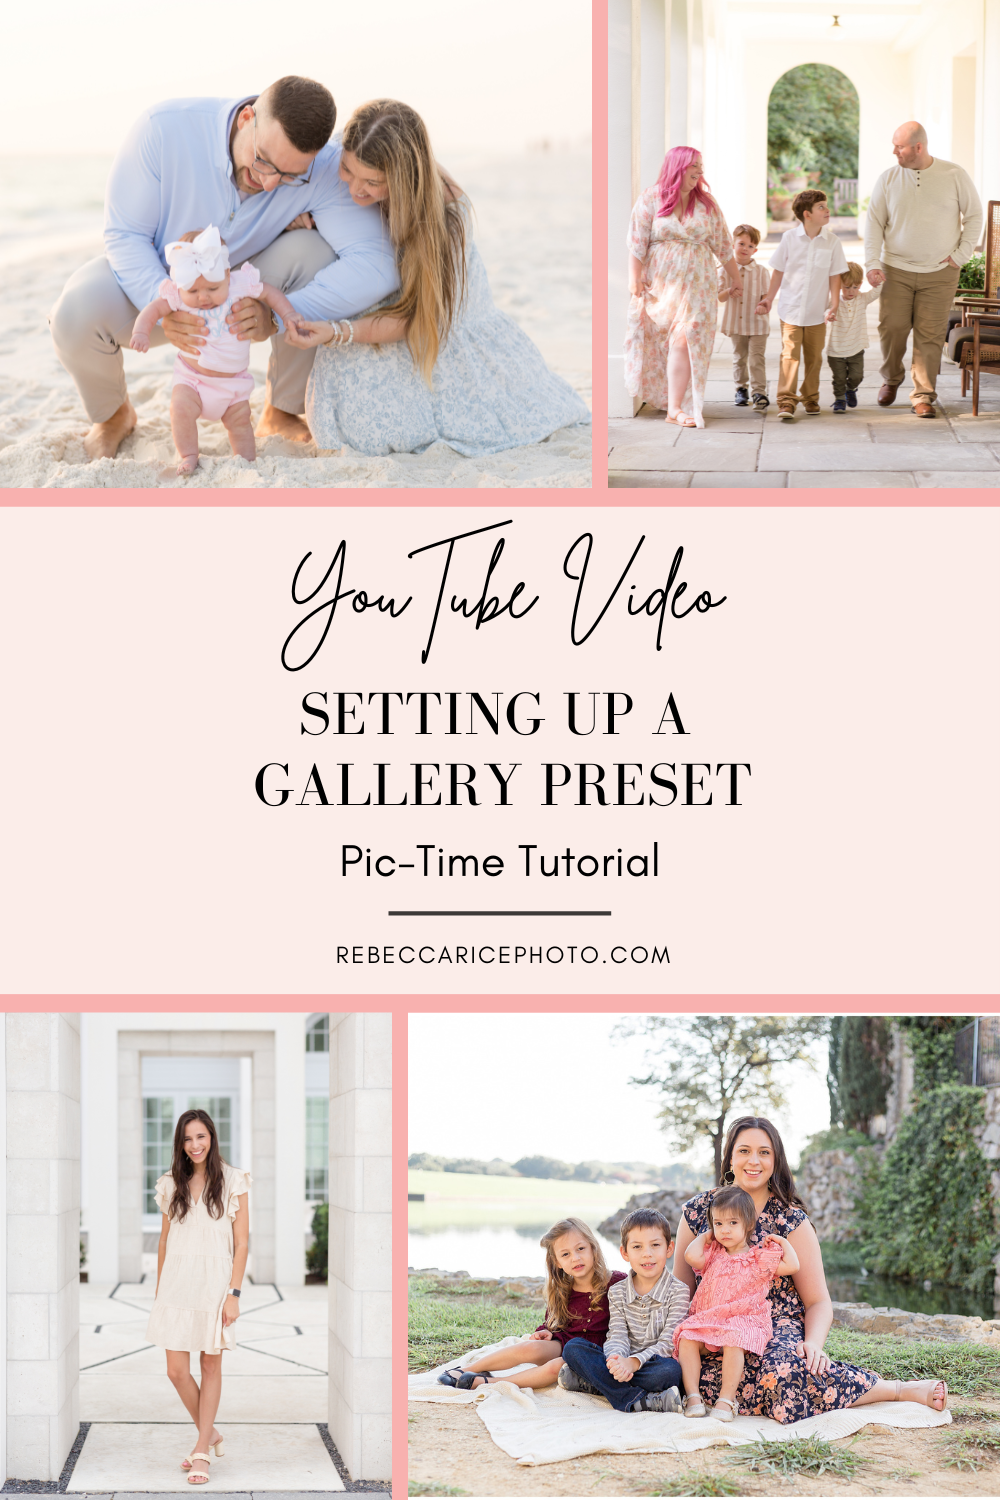 Setting up a Gallery Preset | Pic-Time Tutorial